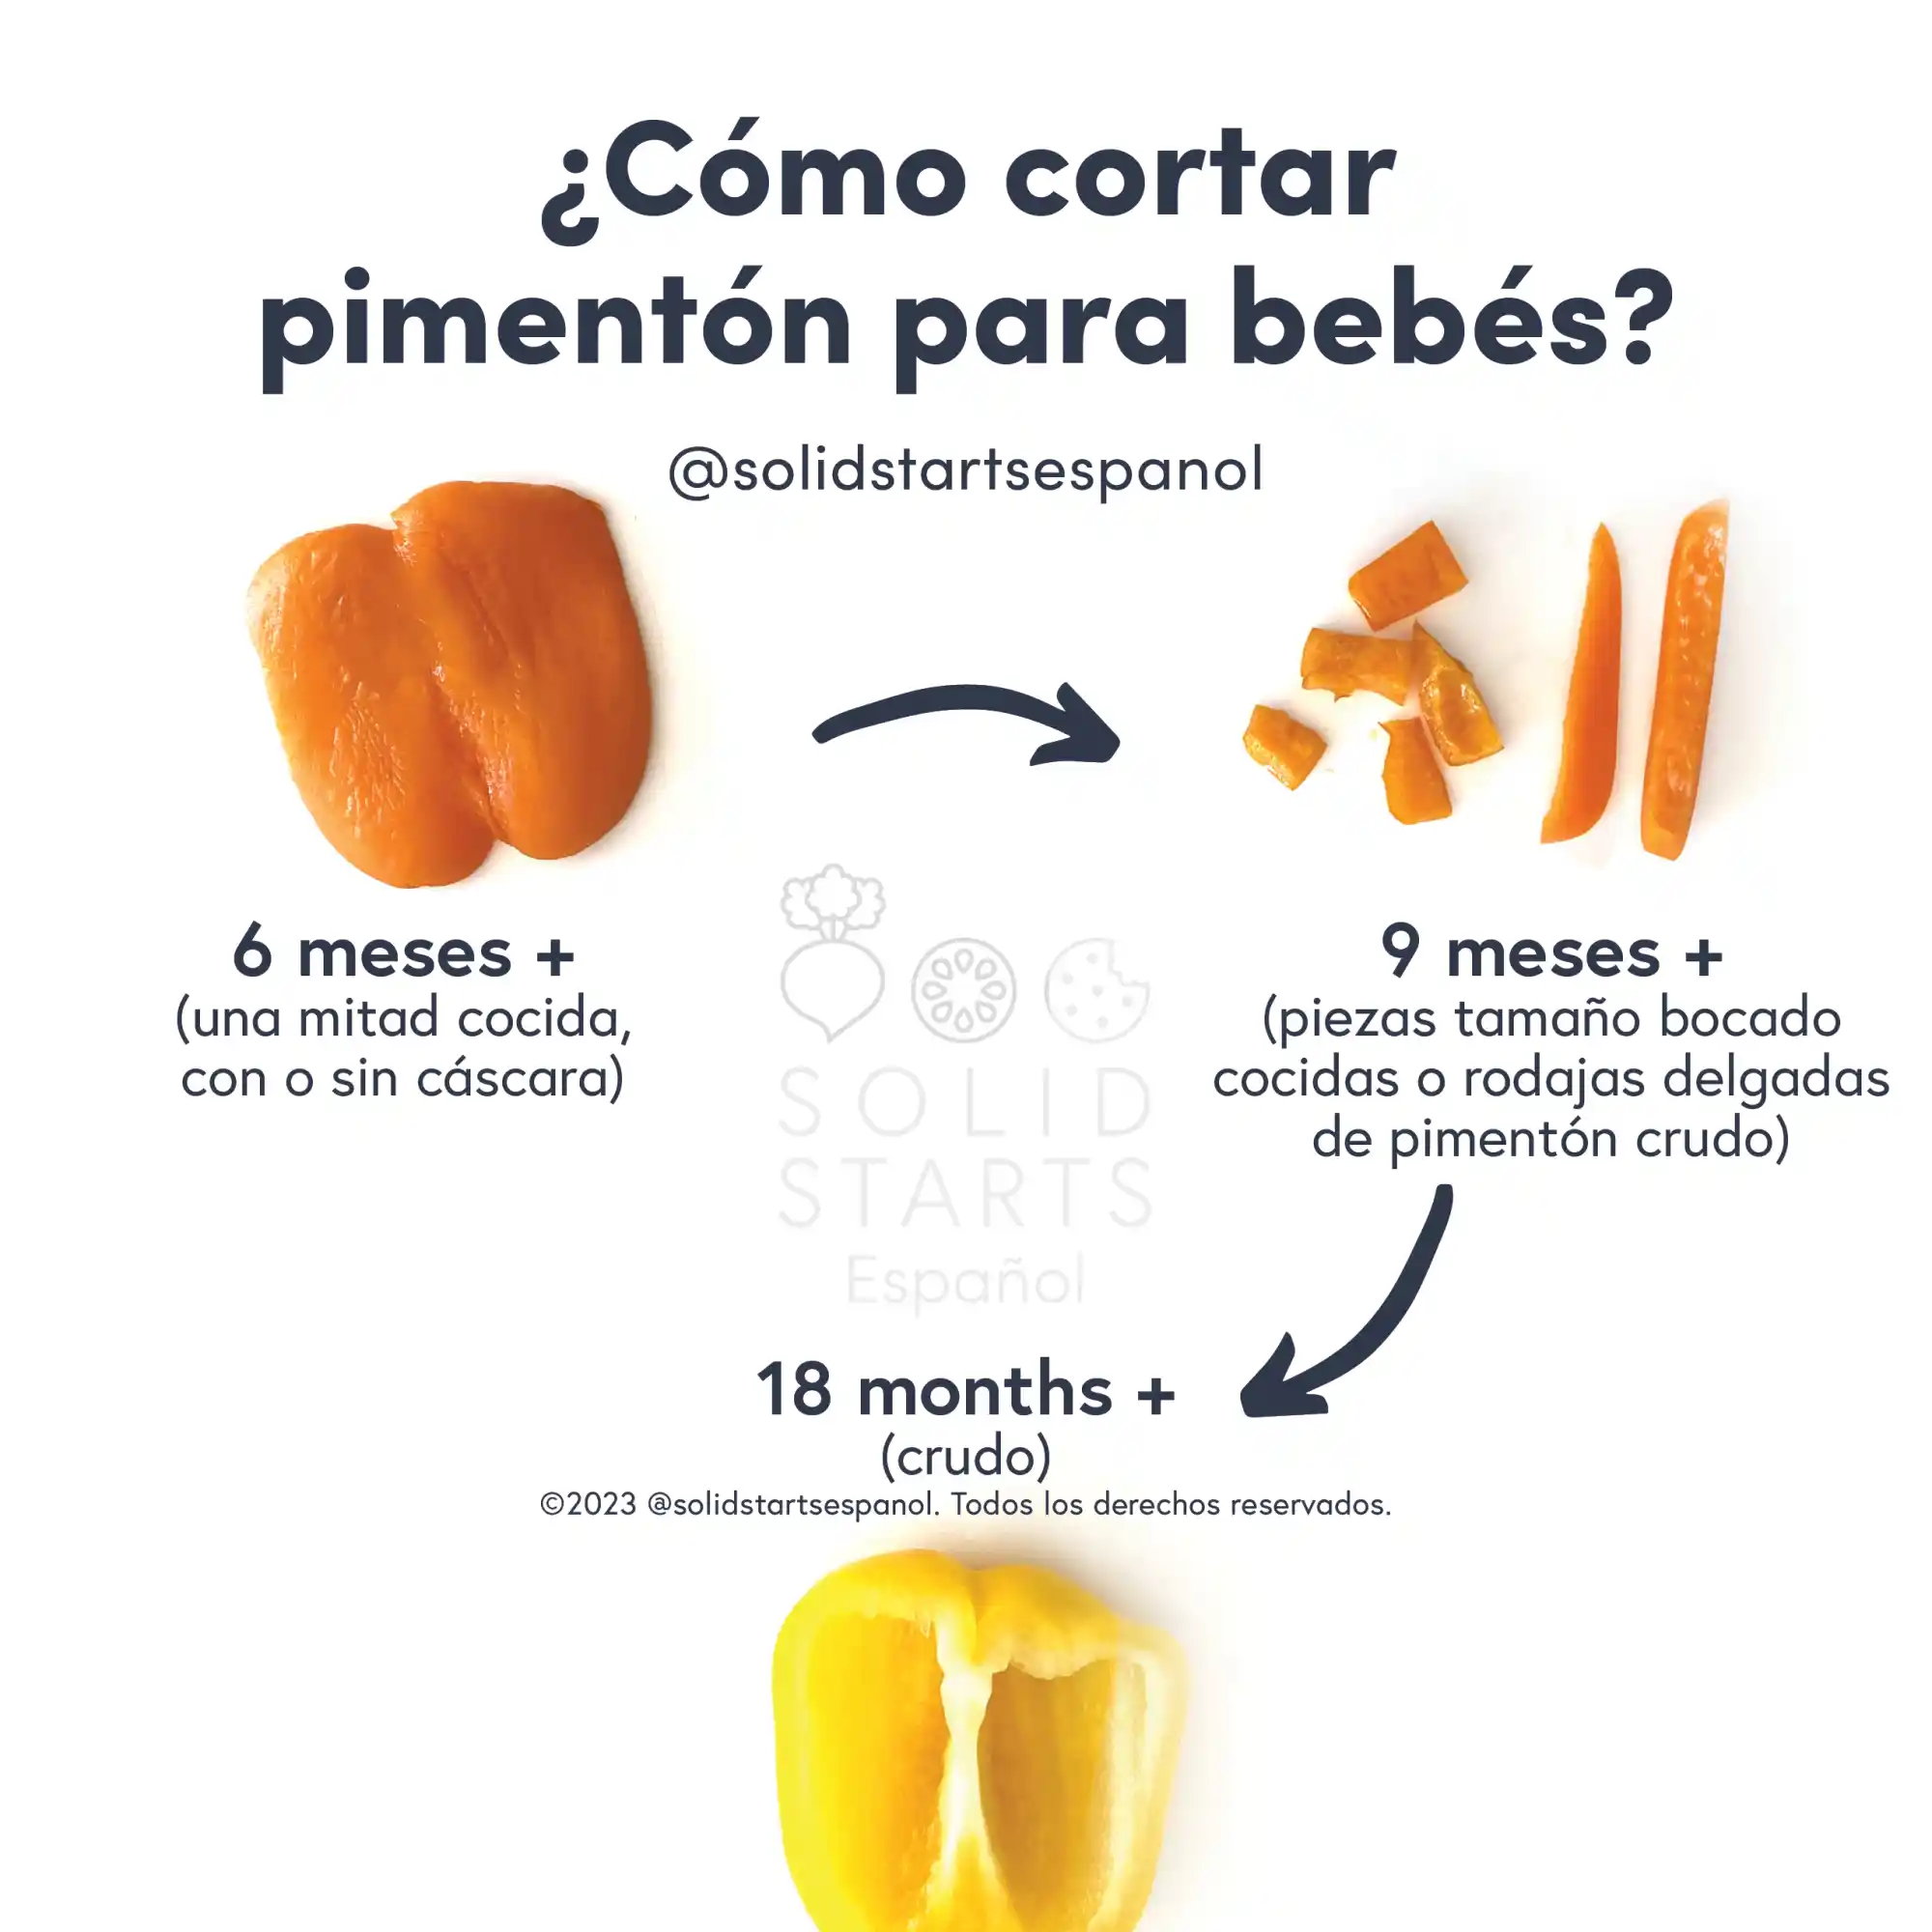 an infographic with the header "how to cut bell pepper for babies": a half of a cooked bell pepper, skin removed, for 6 months+, cooked chopped pieces or raw thin slices for babies 9 months+, half a raw bell pepper for 18 months+